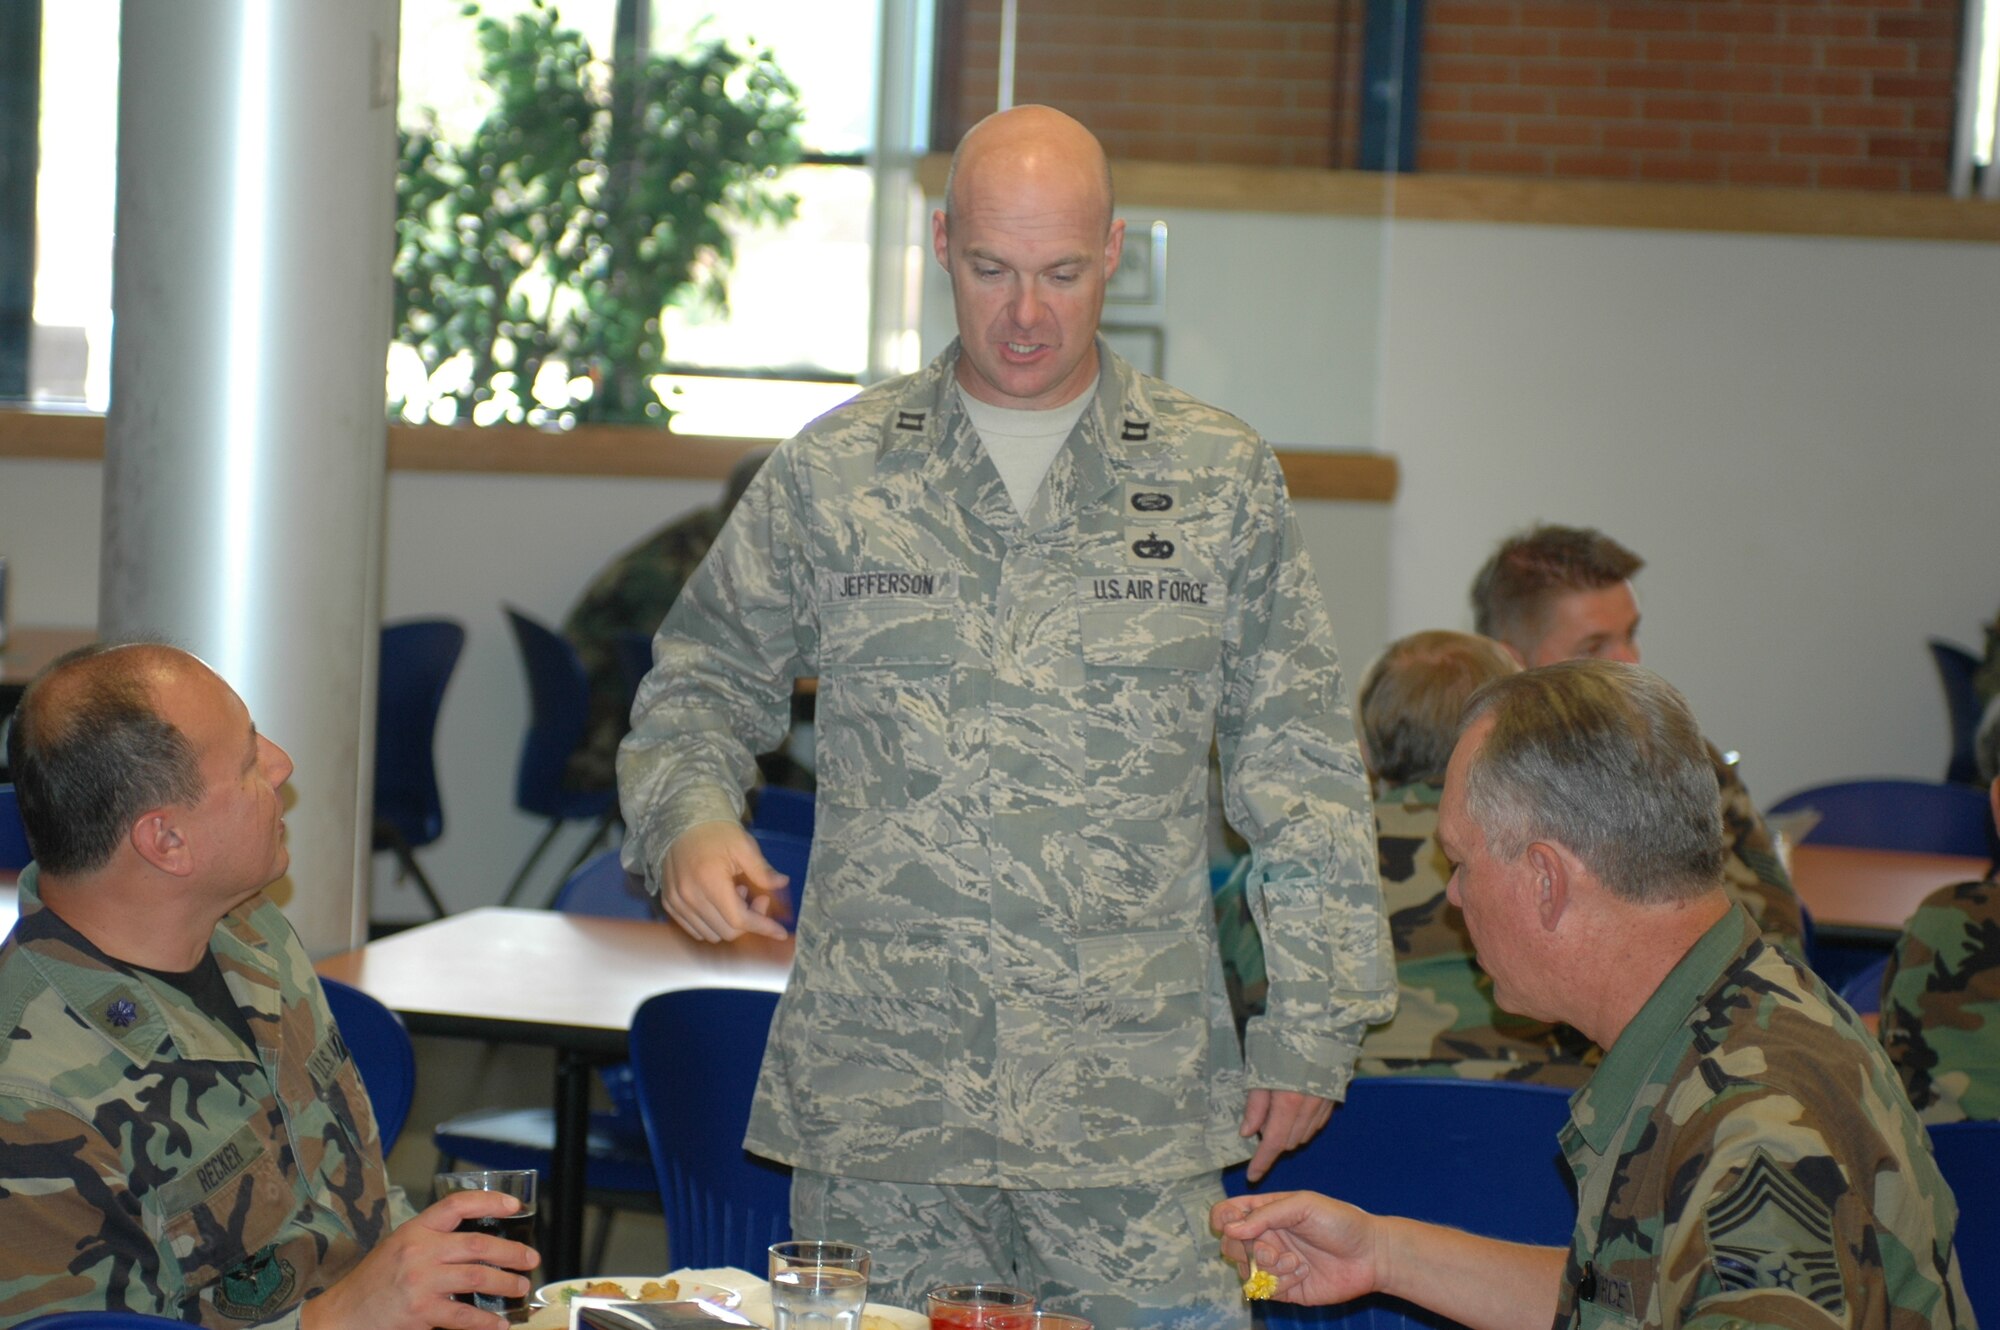 Capt. Paul Jefferson, service’s commander, talks with Chief Master Sgt. Russell Sullivan and Lt. Col. Chuck Recker about their lunch. Captain Jefferson makes sure the food is good, and served with the appropriate portions. Services has to meet Air Force standards within plus or minus 10 percent. That means they are not able to make or lose much money. Monitoring portions is one way they are able to successfully meet rigid standards. (Air National Guard photo by 1st Lt. Dan Dodson)